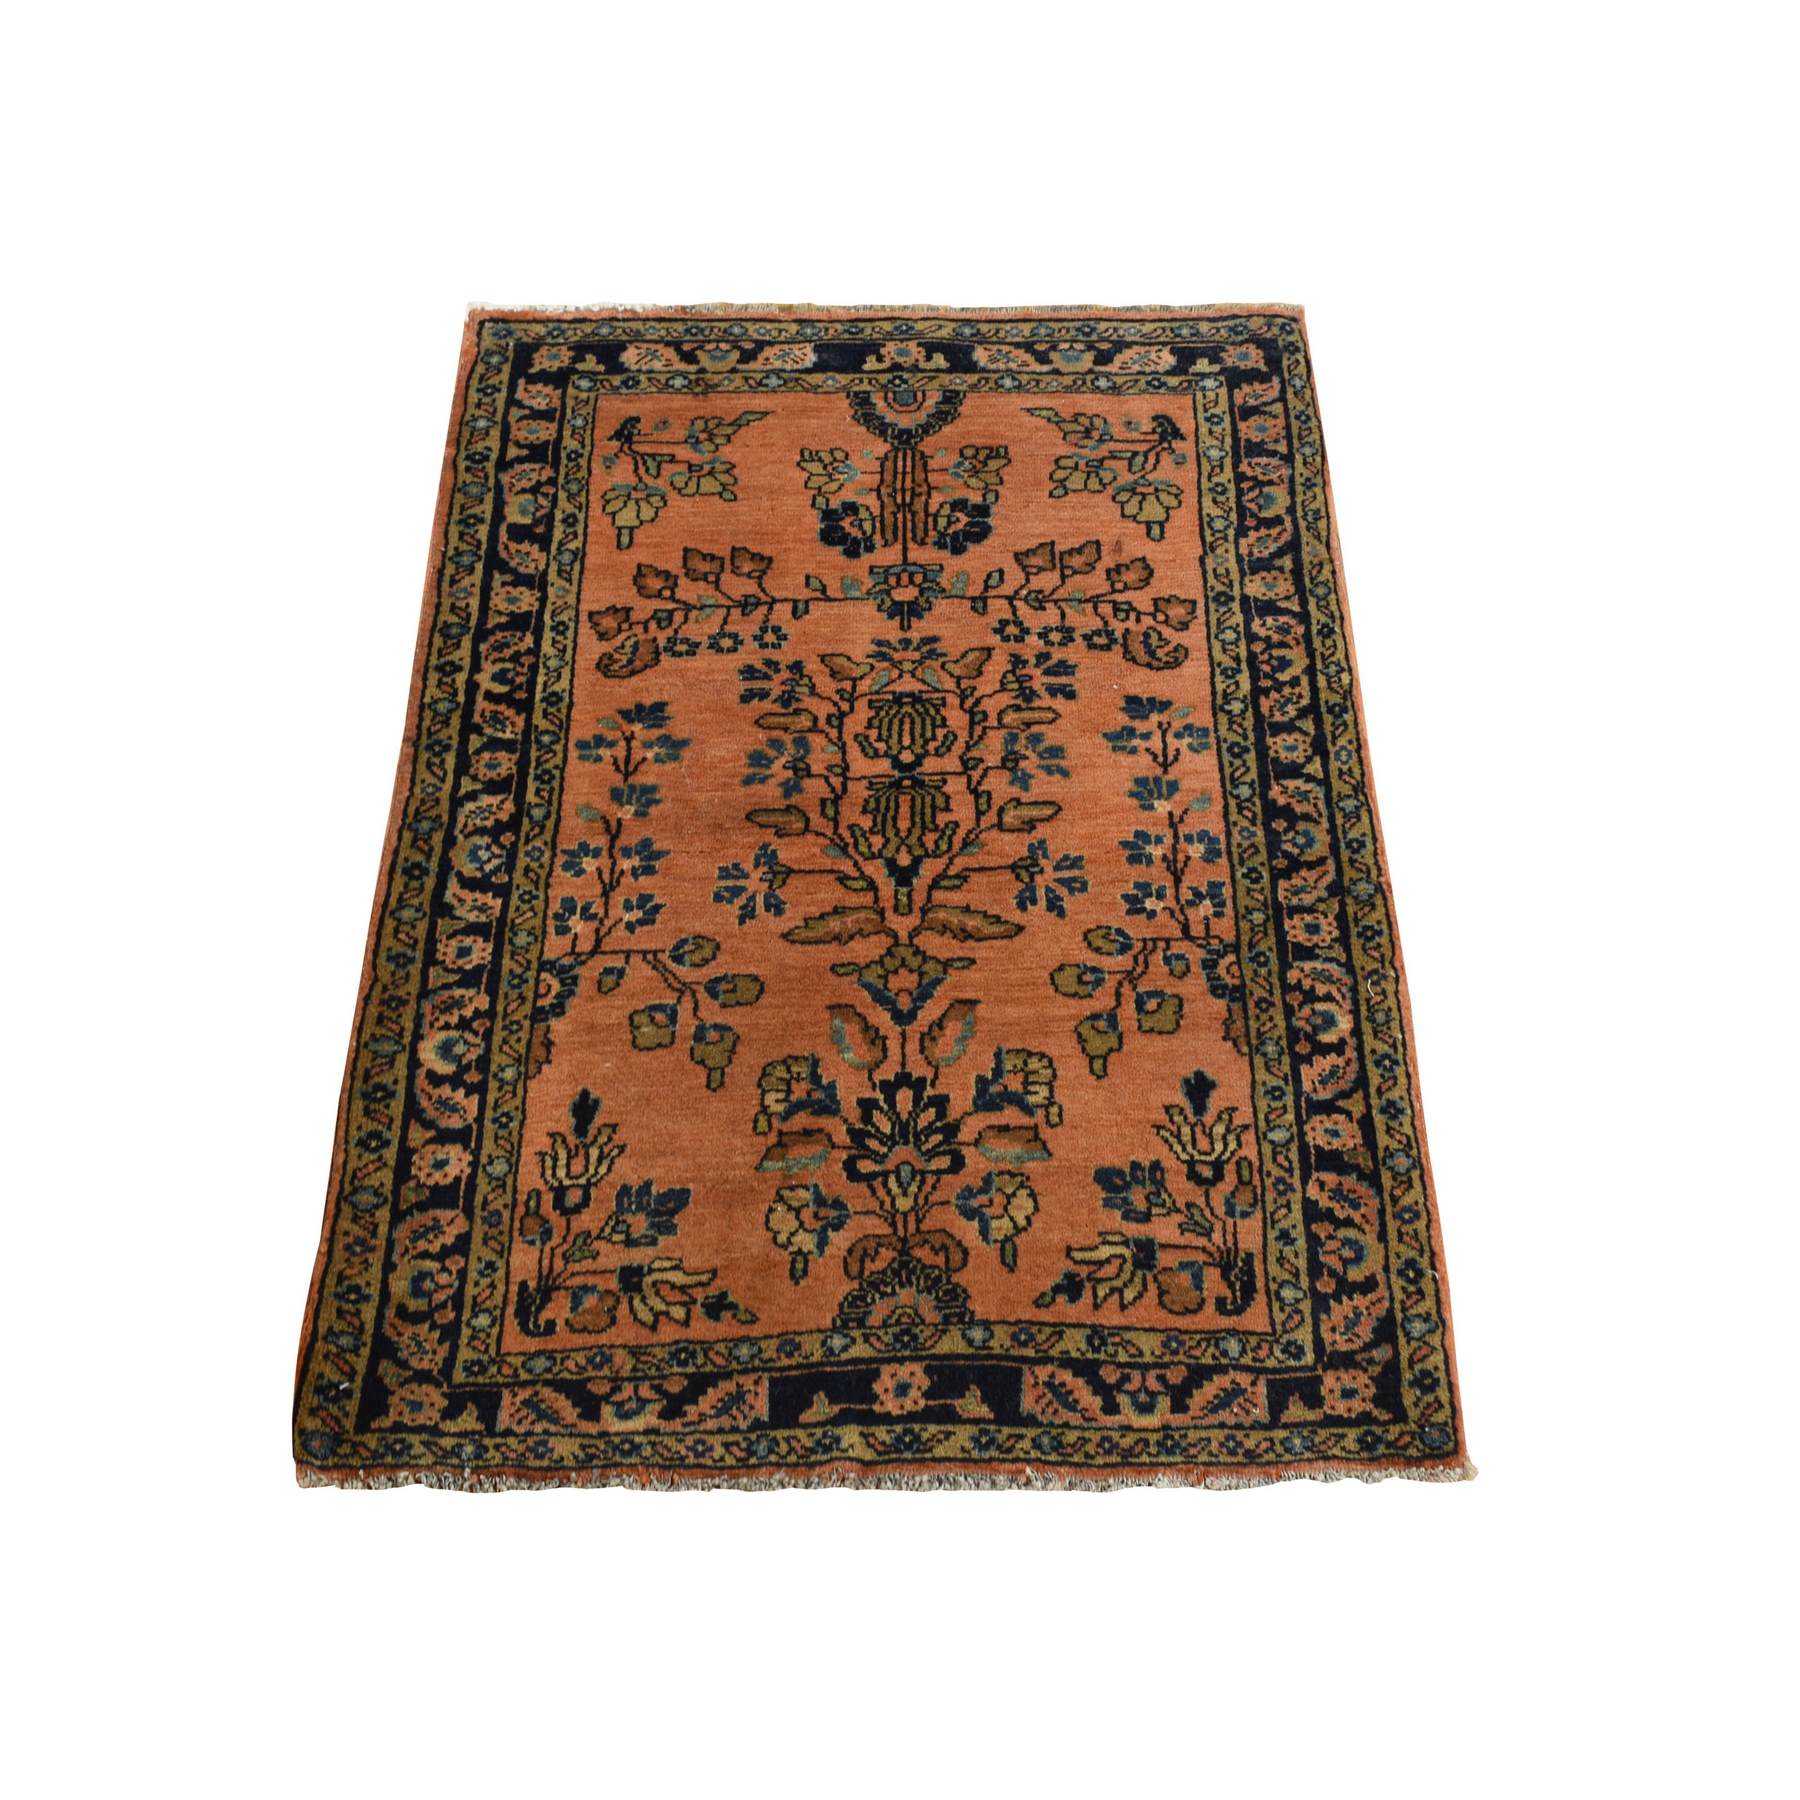 Antique-Hand-Knotted-Rug-390930